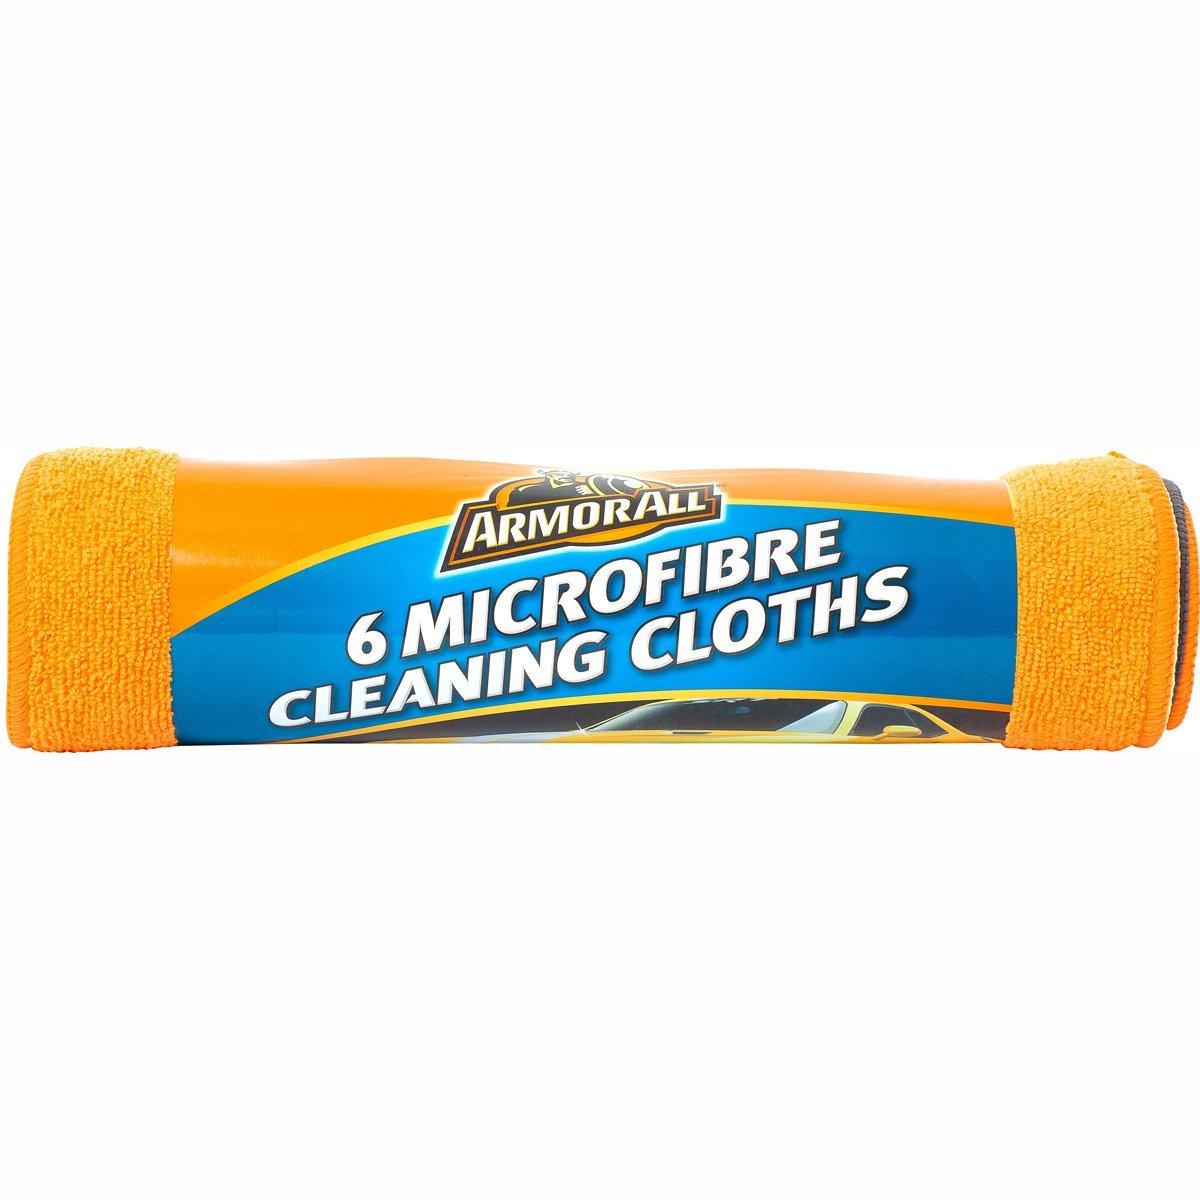 Armor All Microfibre Cleaning Cloths - 6 Pack - Browse our range of Care: Brushes & Cloths - getgearedshop 